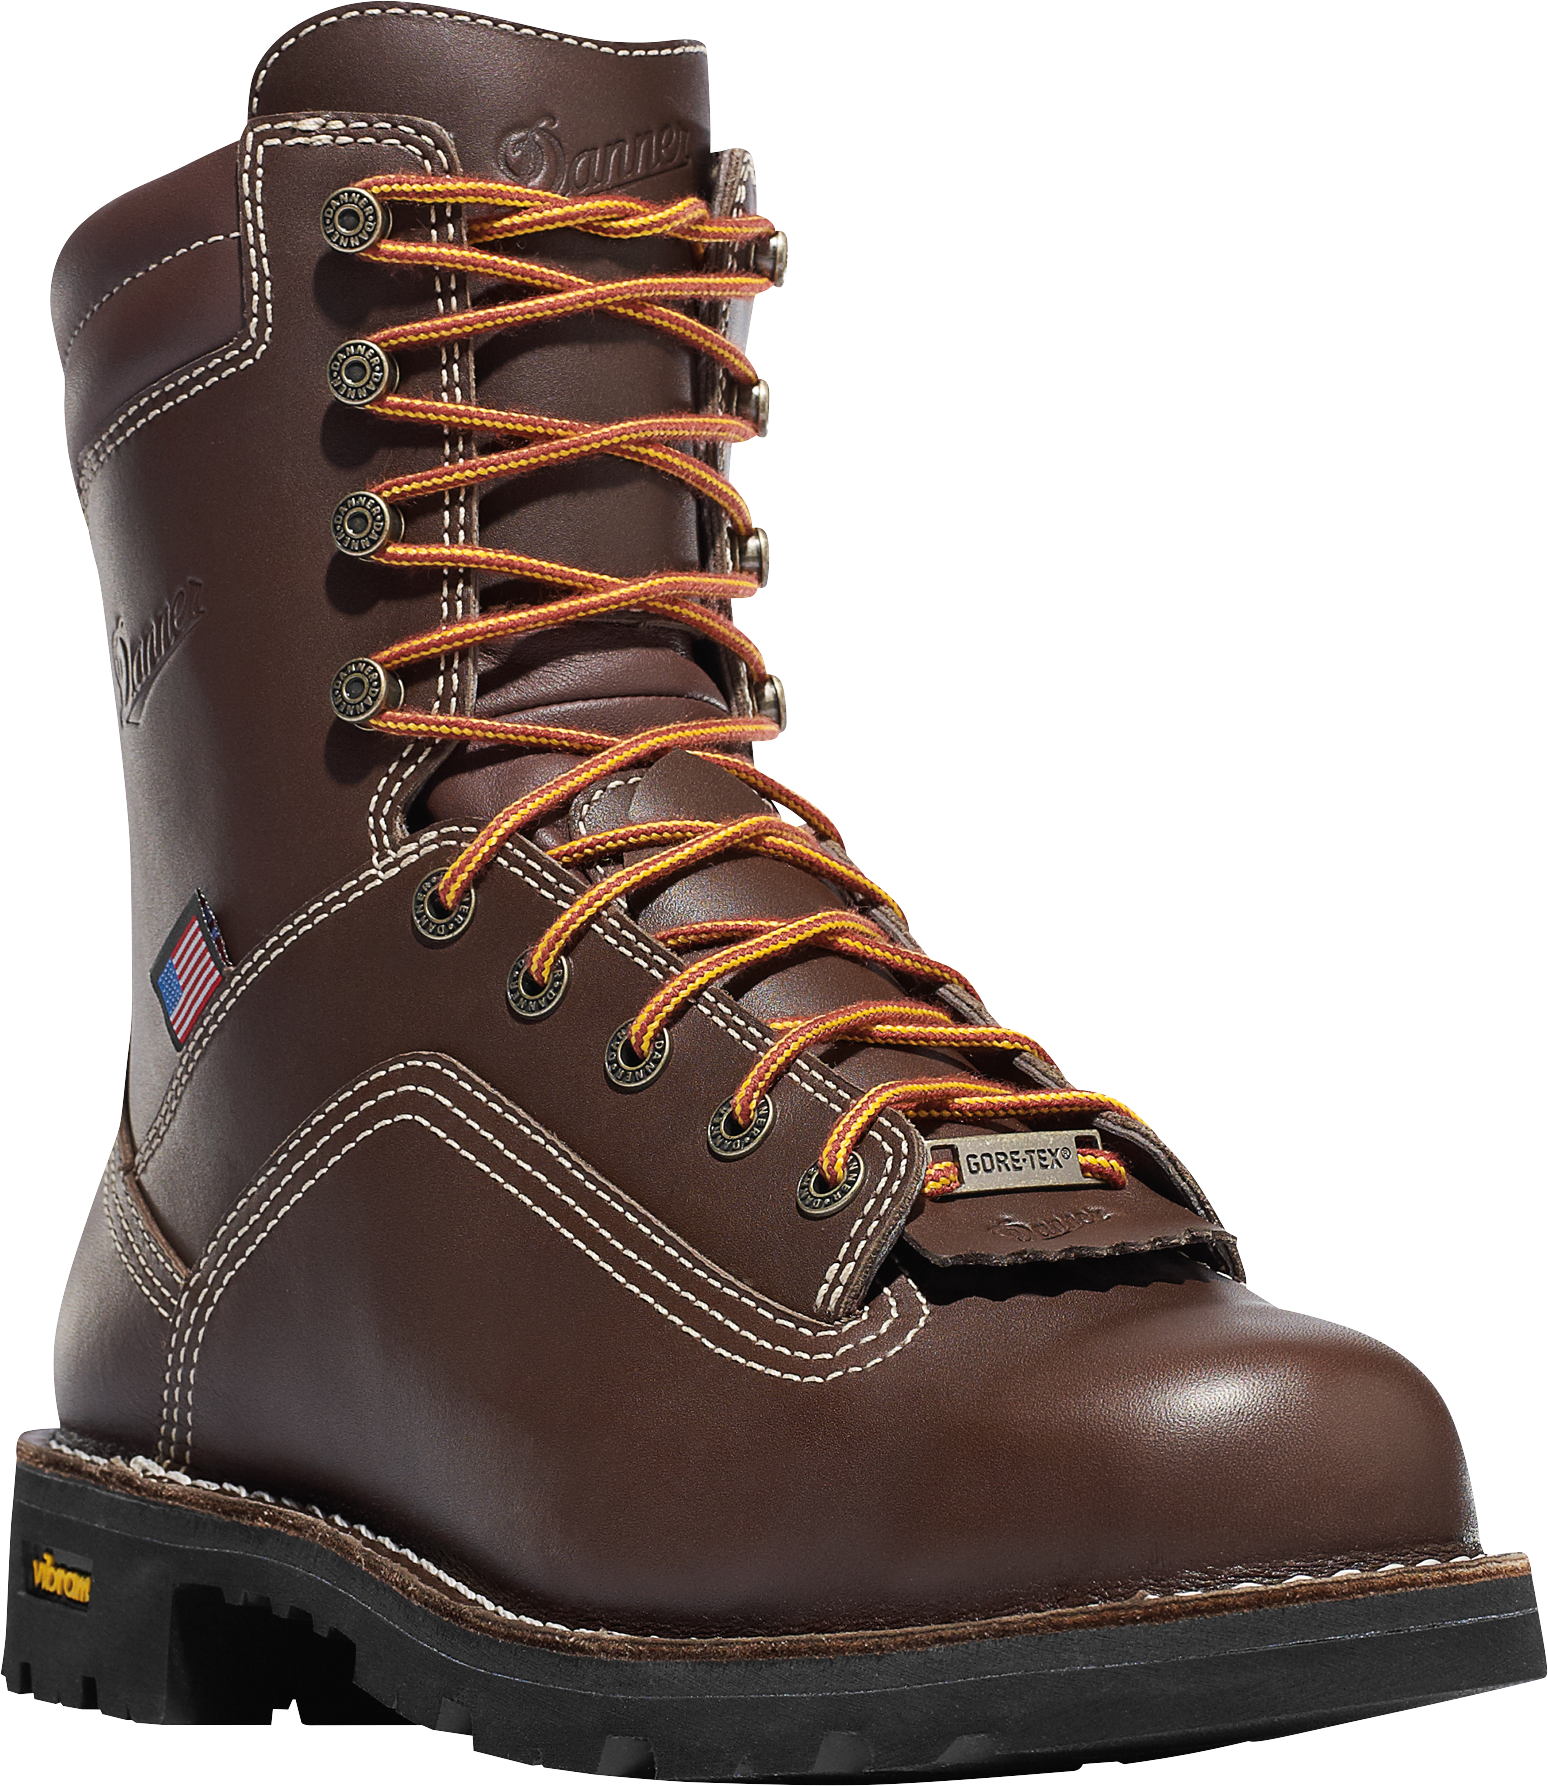 Danner Quarry USA Brown GORE-TEX Alloy Toe Work Boots for Men - Brown - 13M